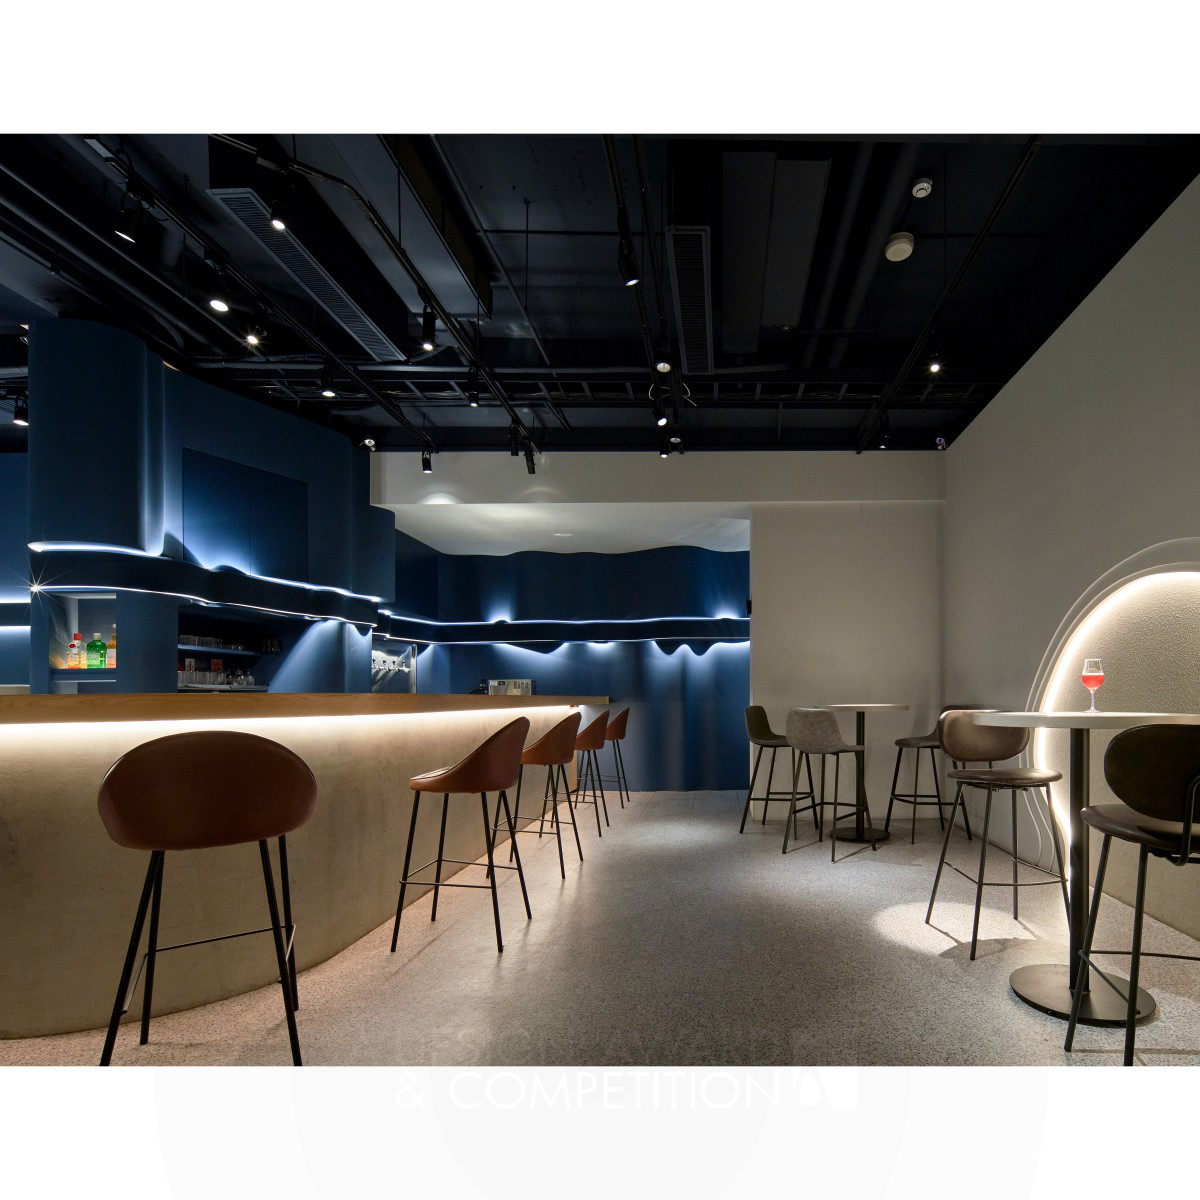 Ru Yu Wu wins Bronze at the prestigious A' Interior Space, Retail and Exhibition Design Award with Equal by Tklab Bar.